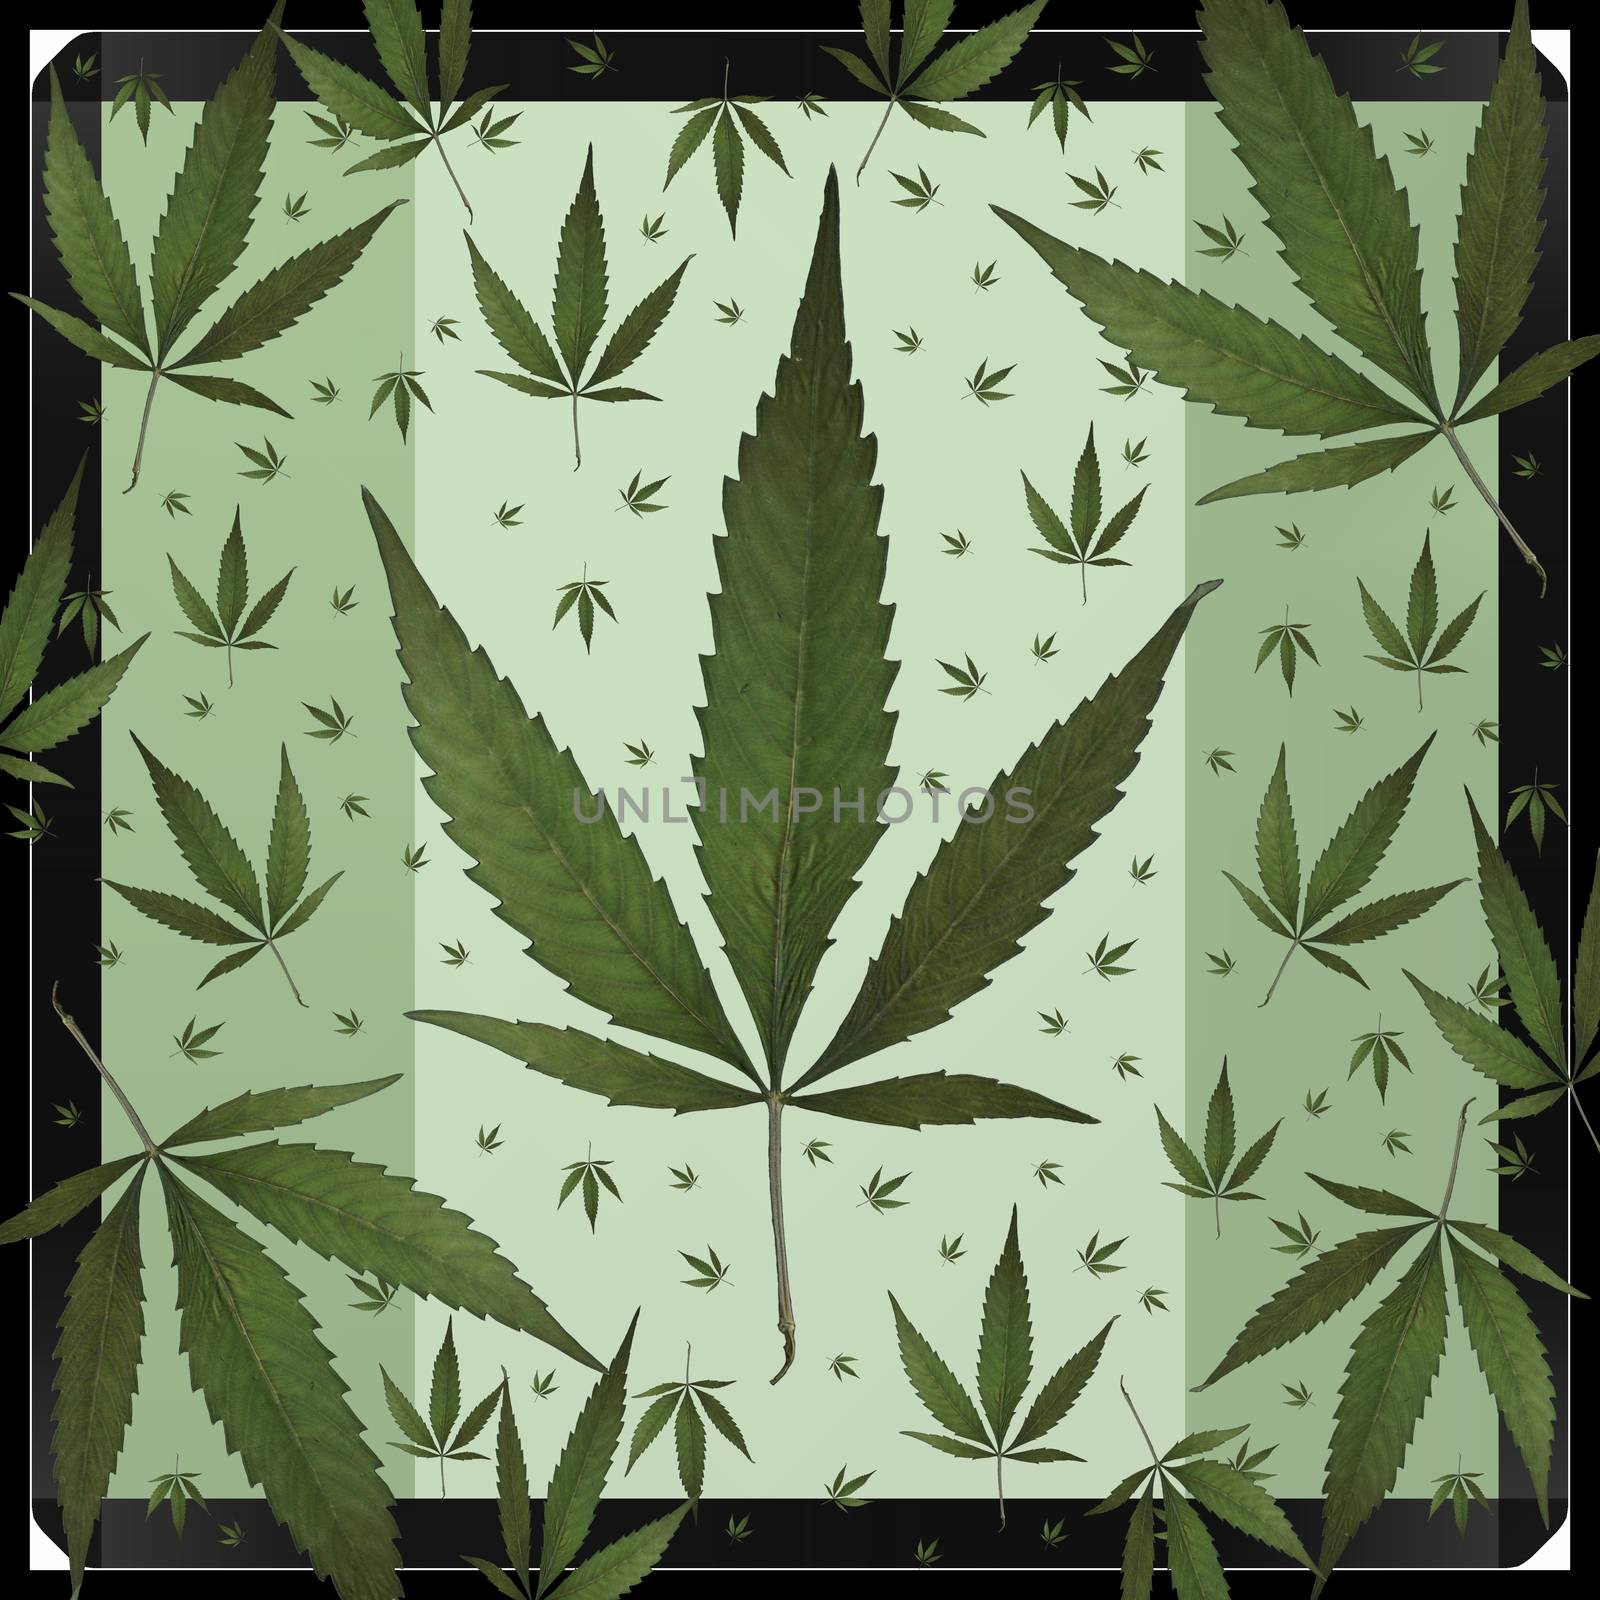 A square format design using weed leaves.